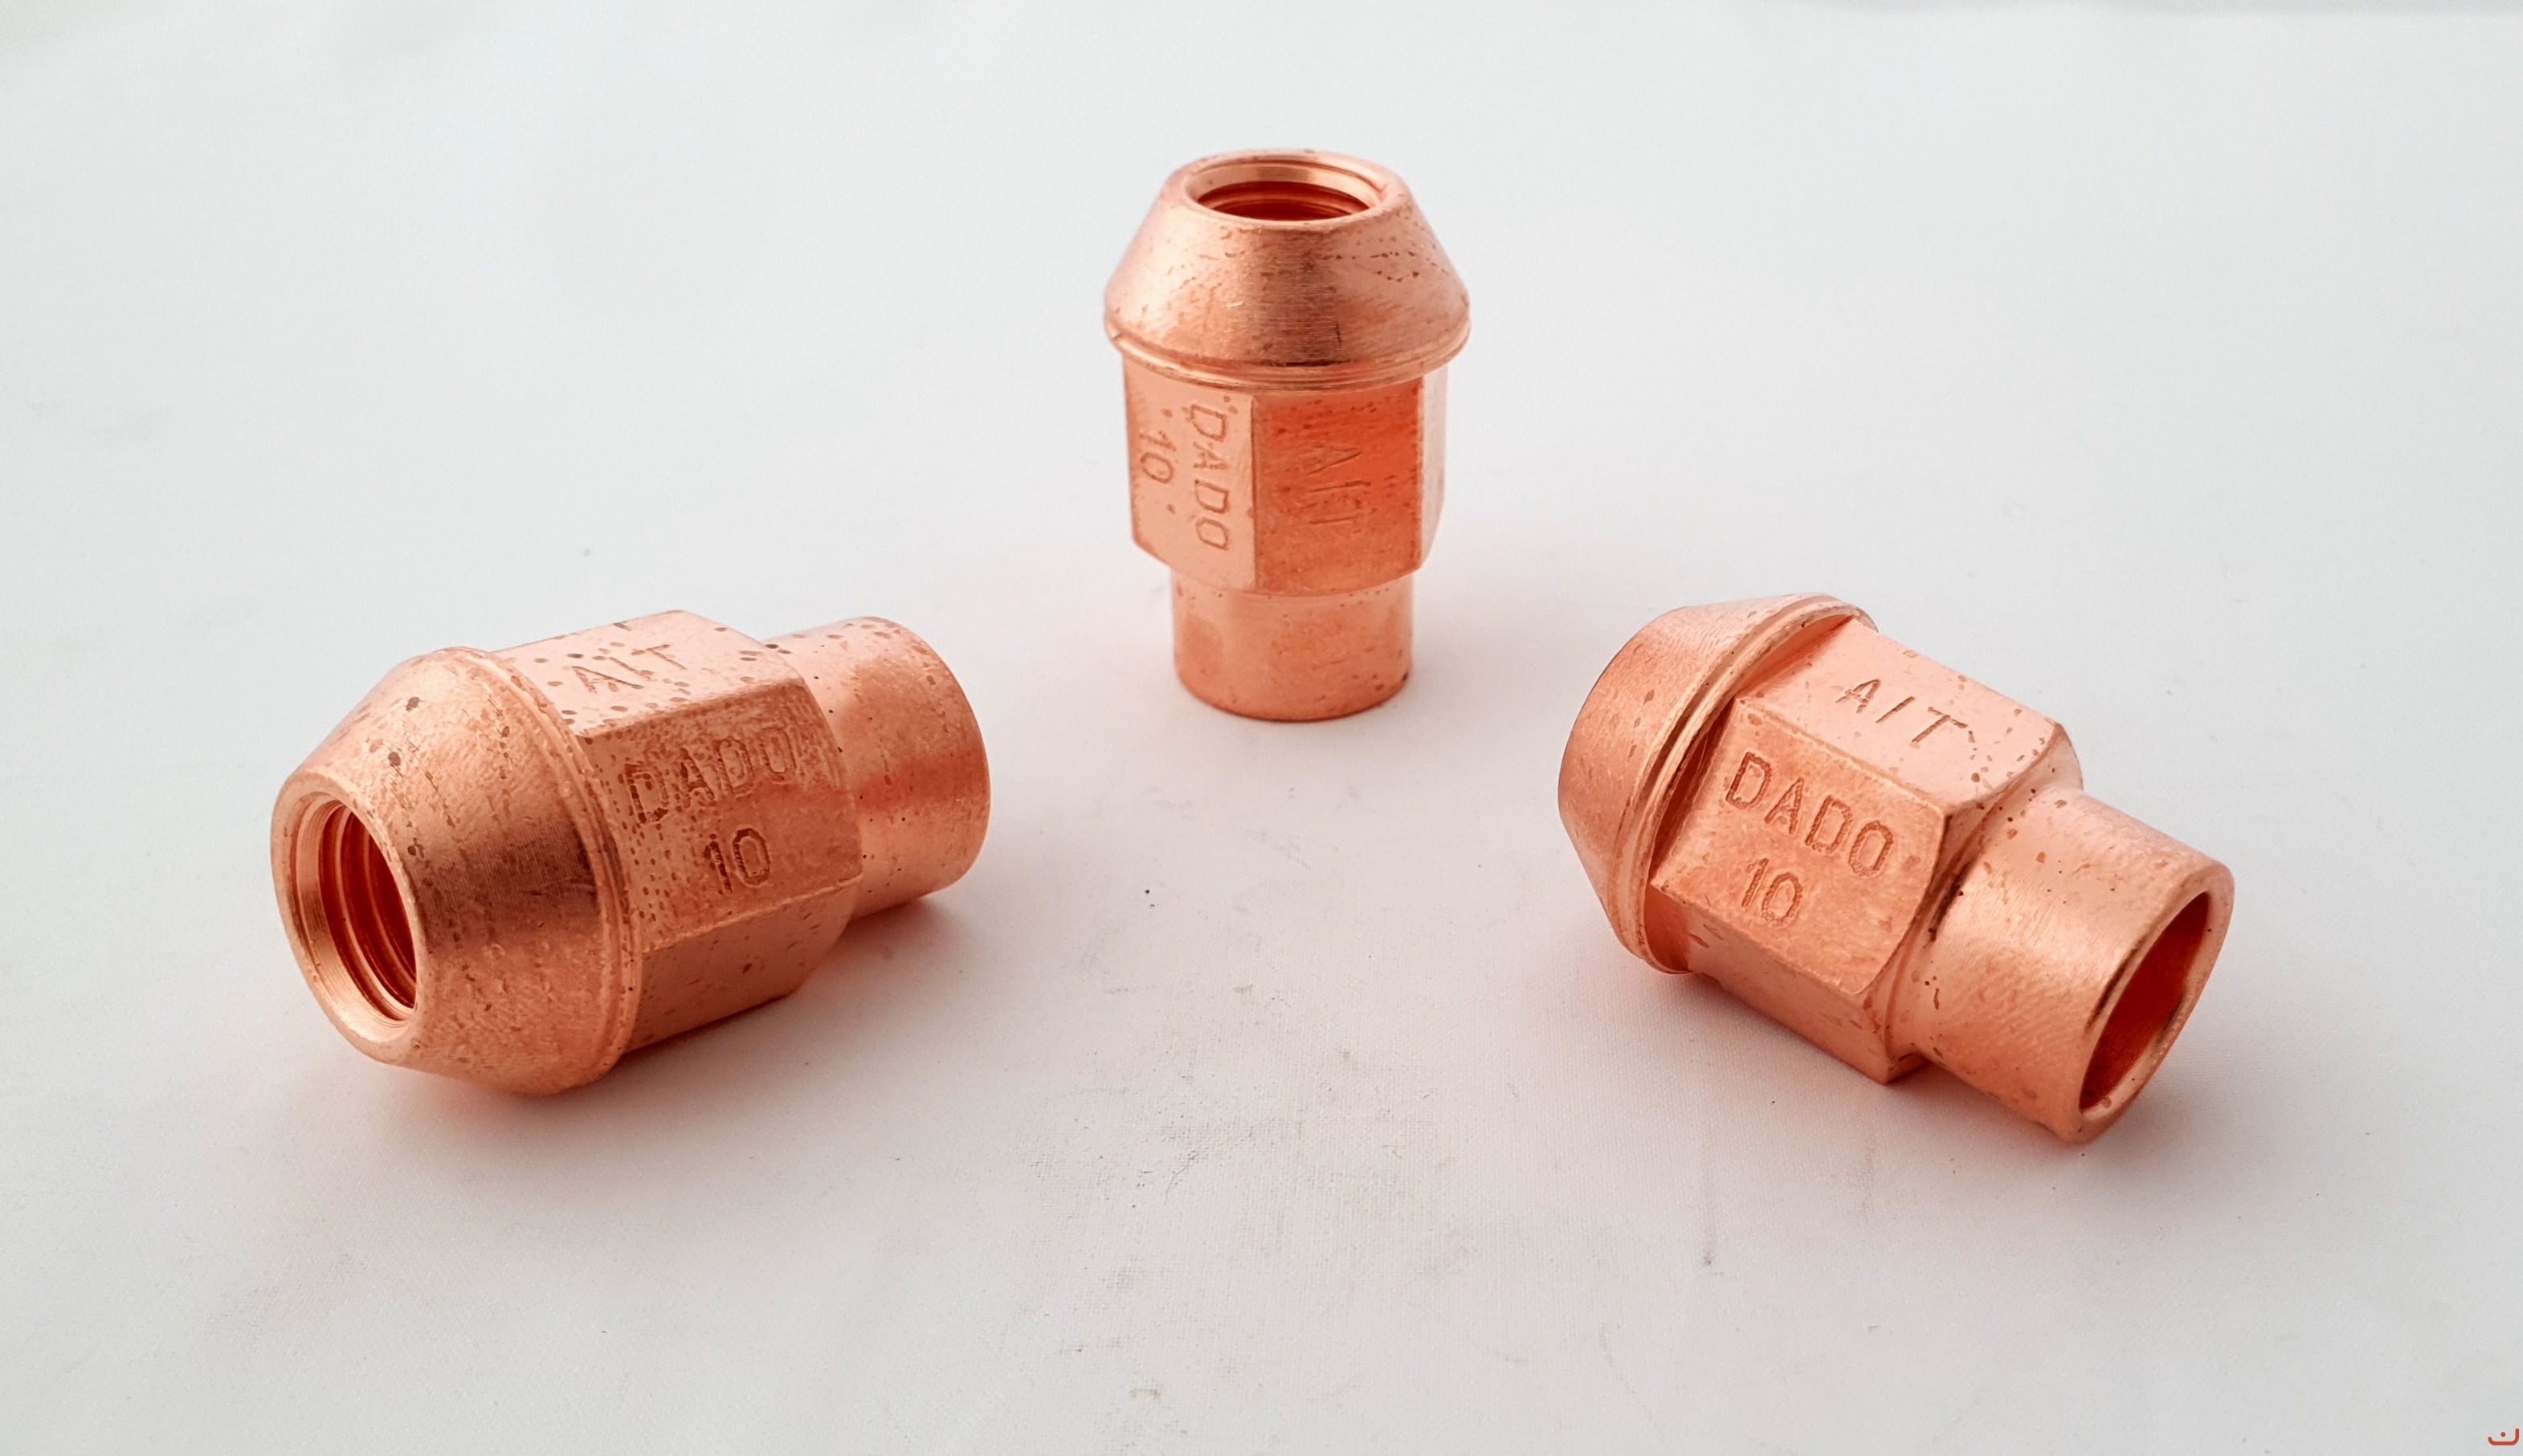 AITECH AIT-DADO-10 Гайка 12x1,5 ex 19mm, od 23mm steel coppered nut (MITSUBISHI gr. N) conical SEAT, total lenght 33mm Photo-1 